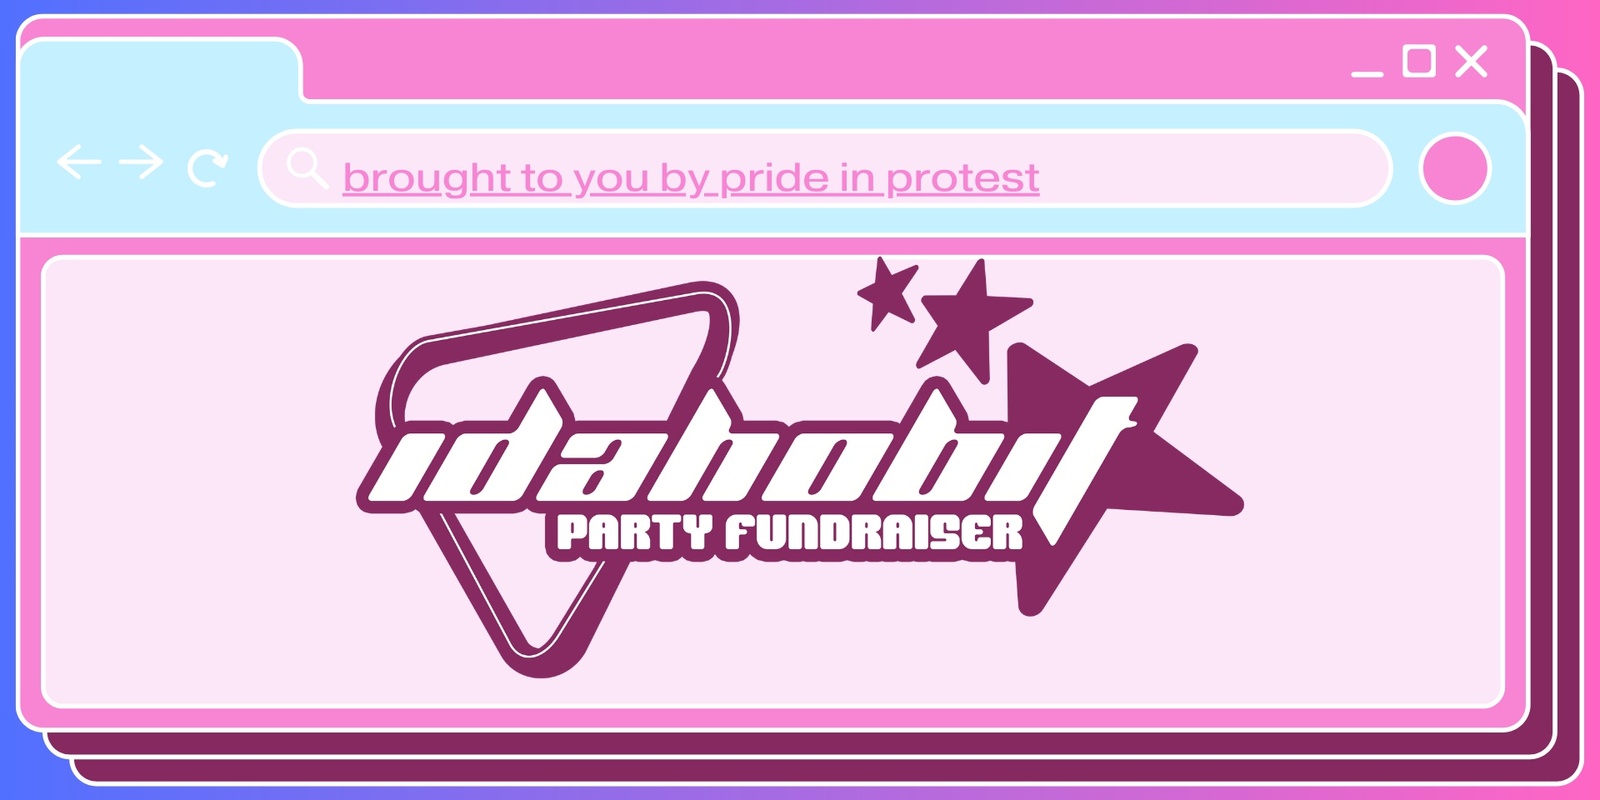 Banner image for 🏳️‍⚧️ IDAHOBIT FUNDRAISER PARTY 🏳️‍⚧️